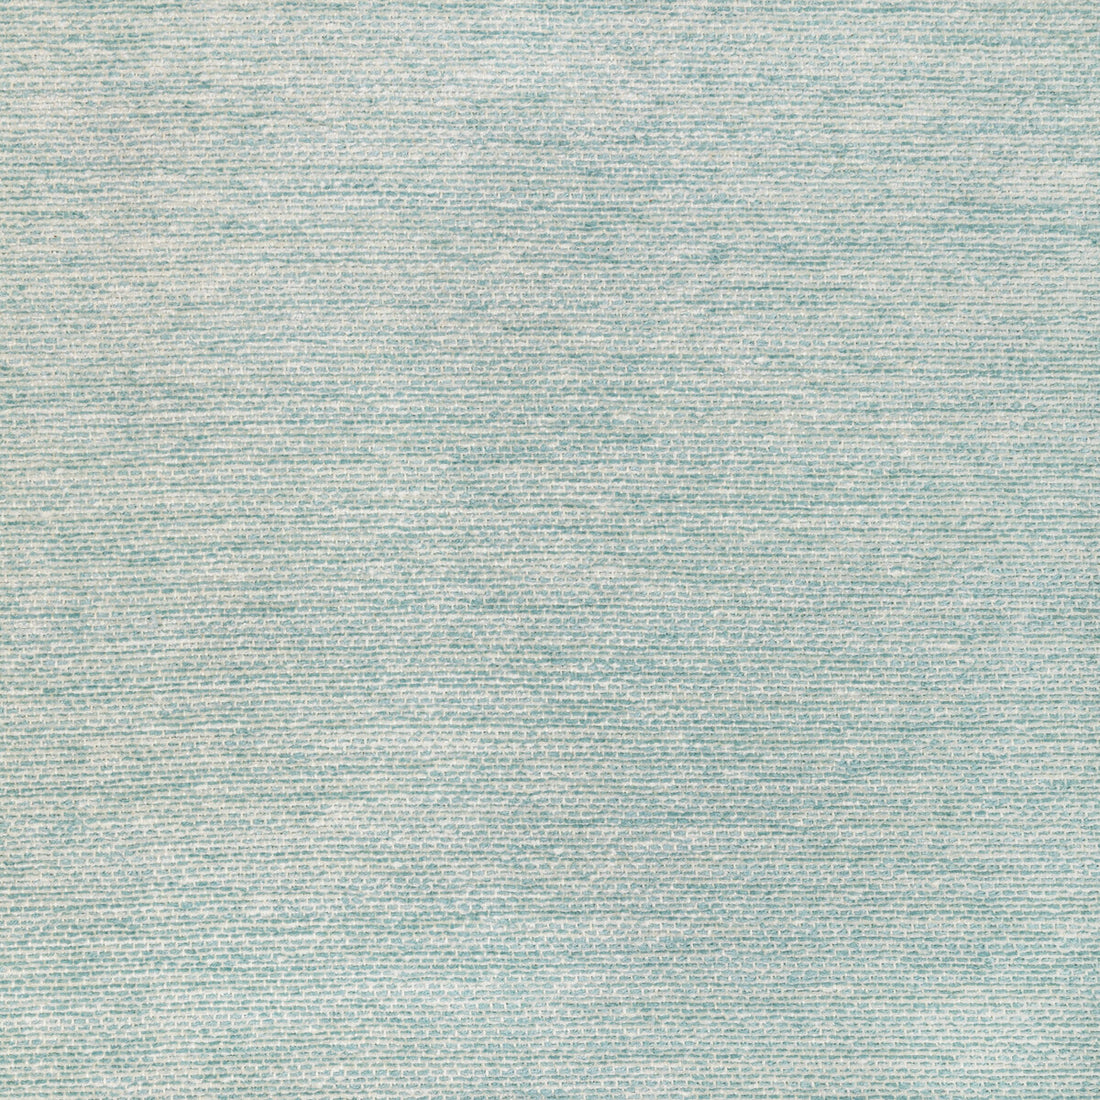 Cognin Texture fabric in mist color - pattern 8022126.113.0 - by Brunschwig &amp; Fils in the Chambery Textures III collection